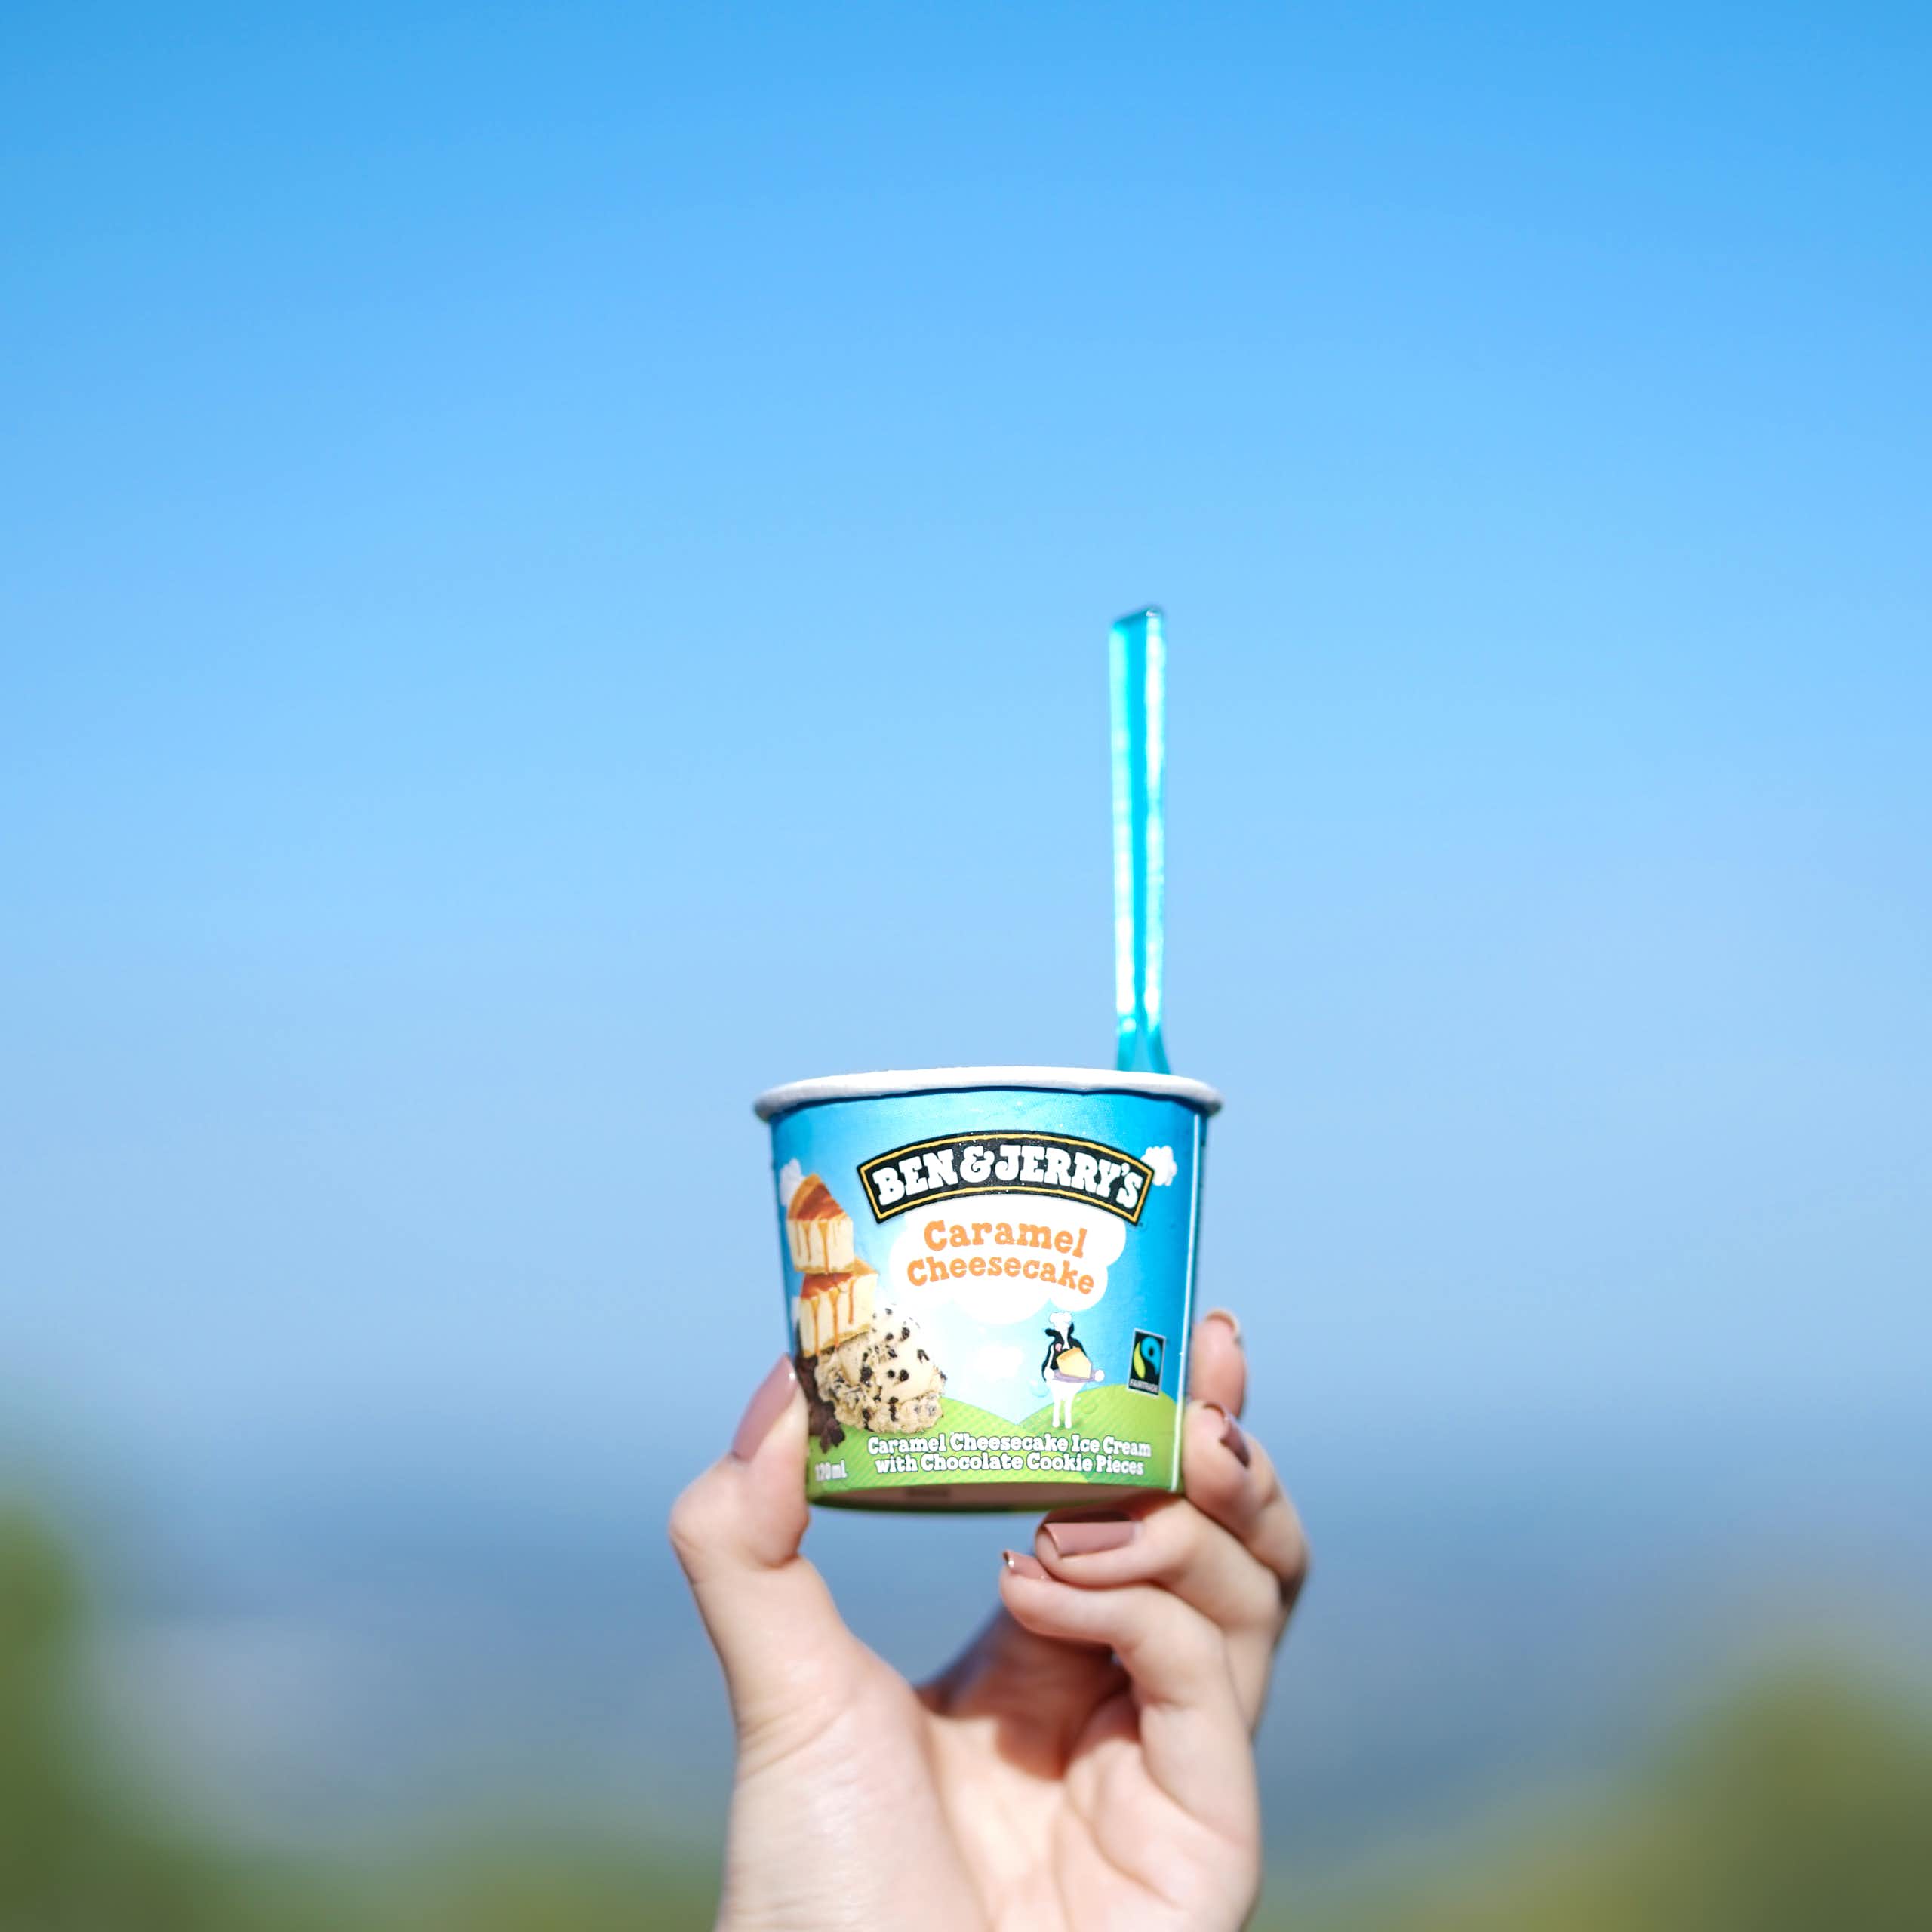 Tub of Ben & Jerry's being held up against the sky